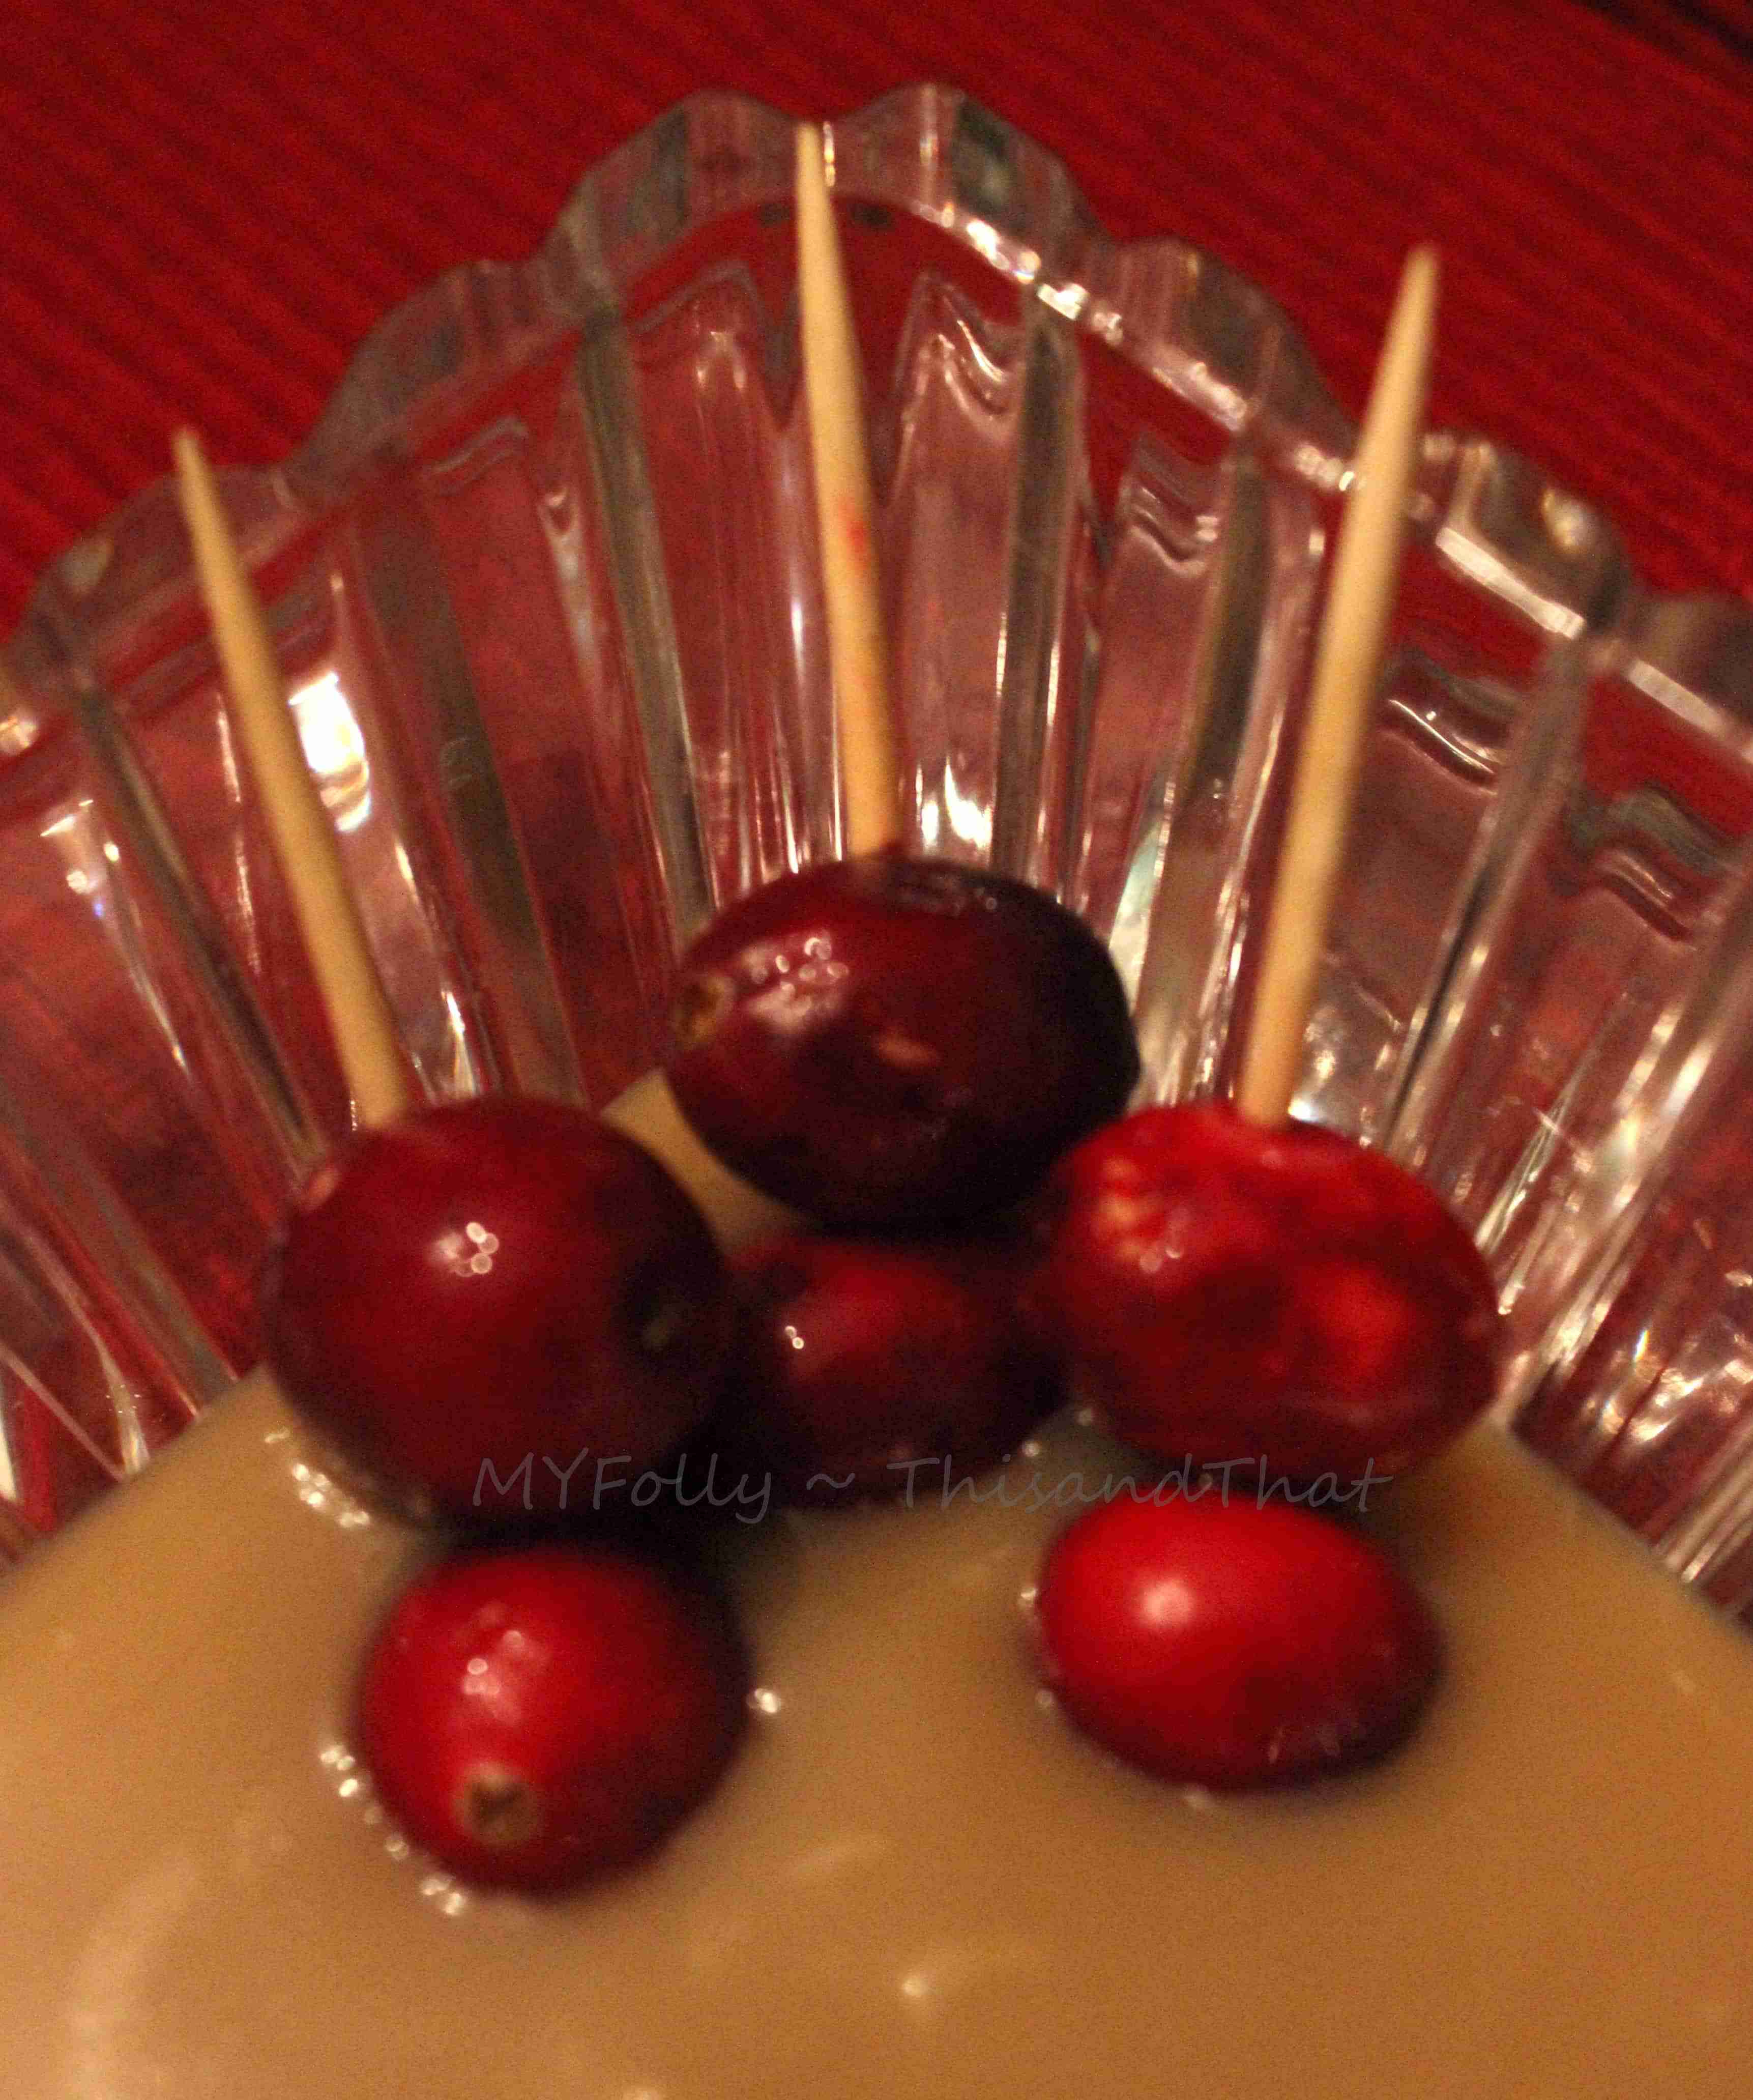 Cranberries with Salted Caramel Dip